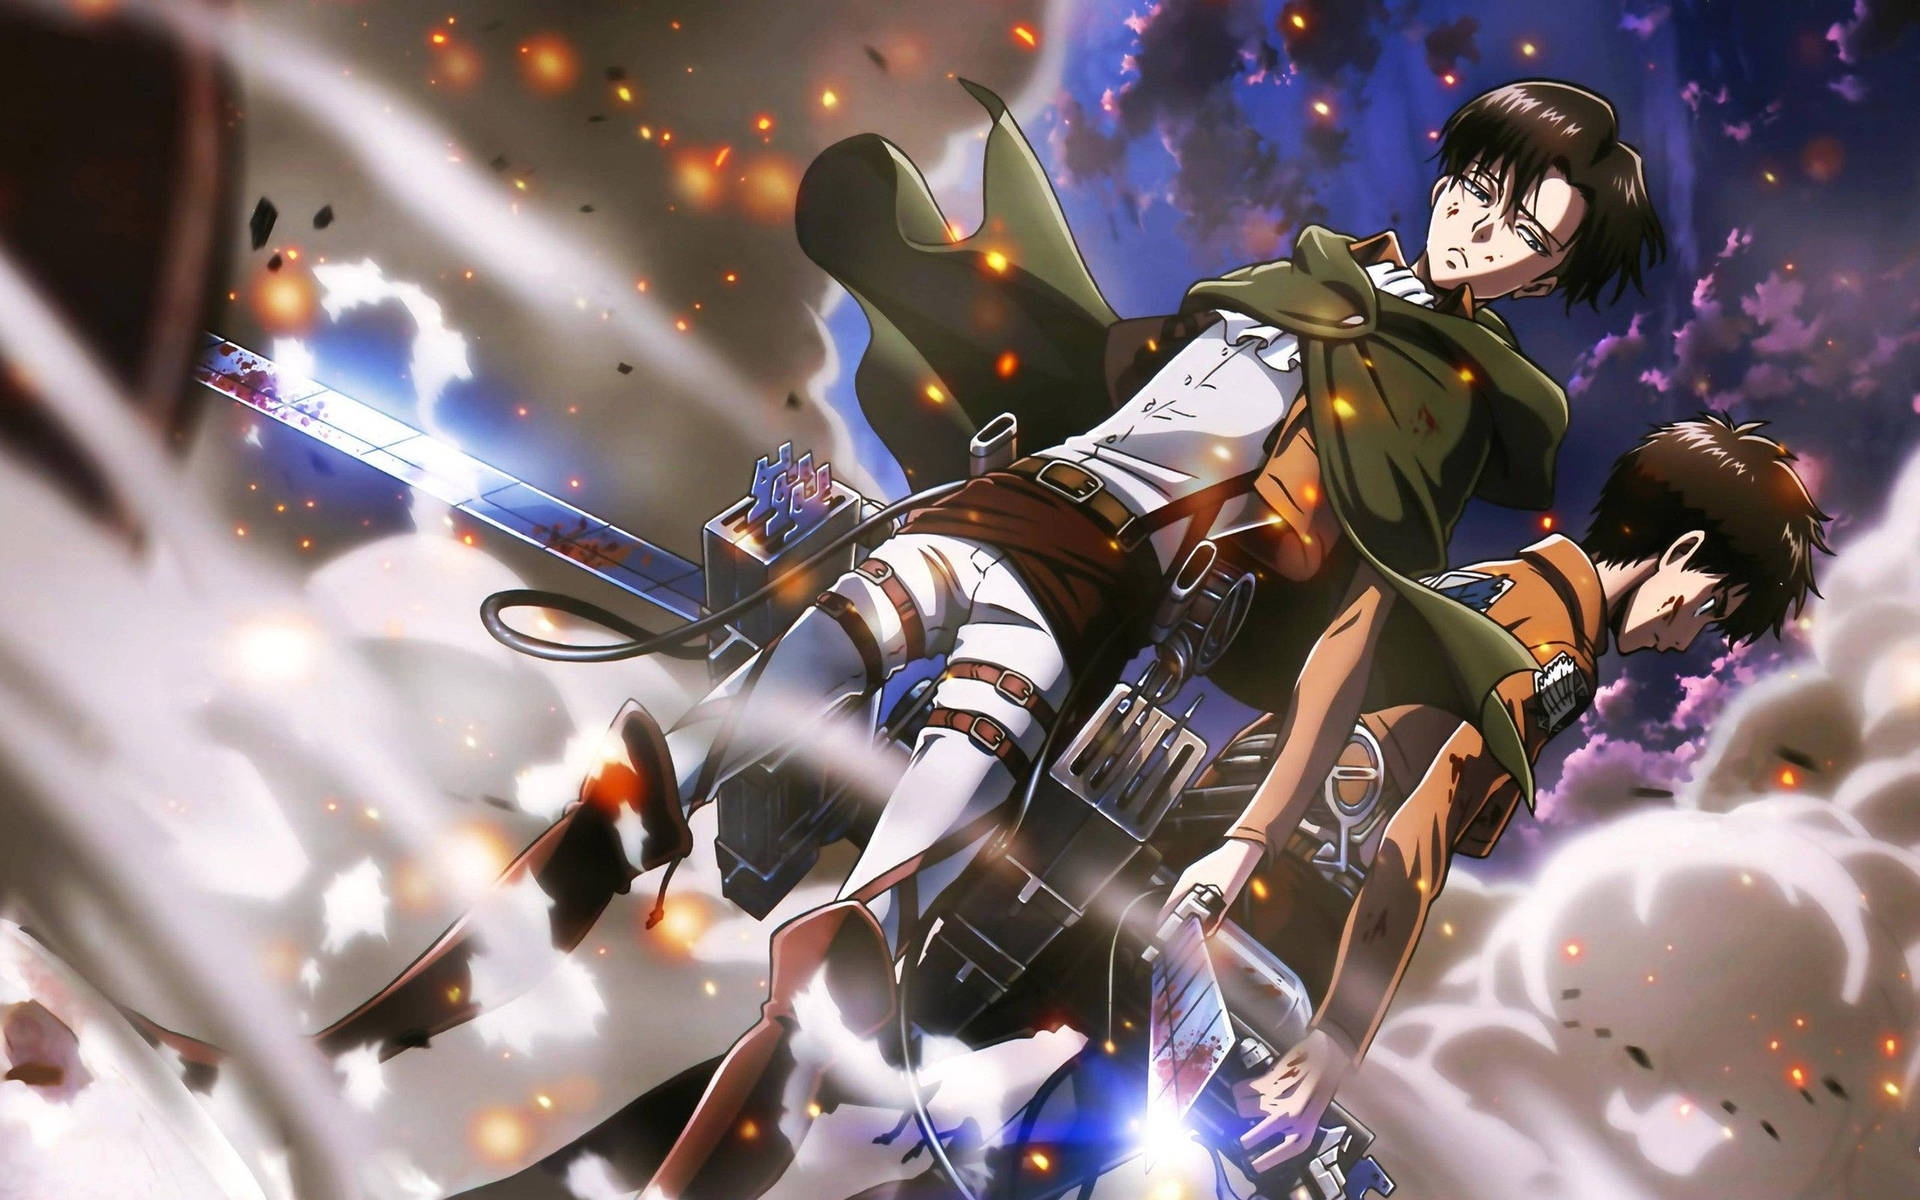 Levi and Eren in the Last Stand Wallpaper